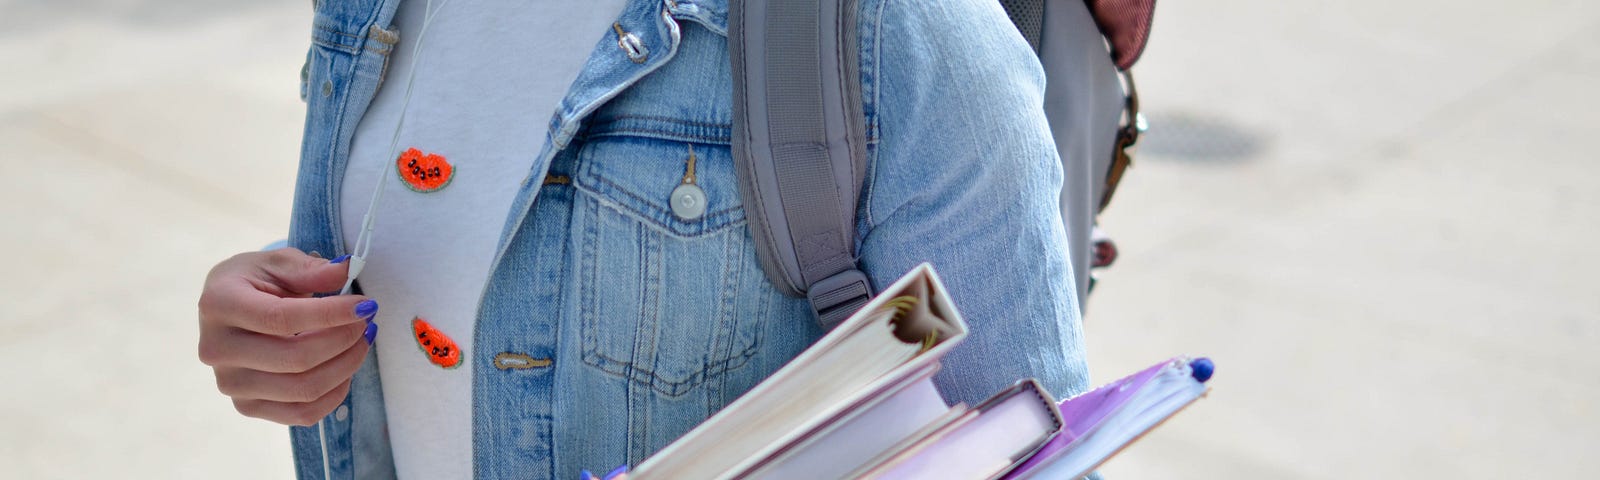 A student wearing a backpack, carrying textbooks in one hand and holding headphones in the other.